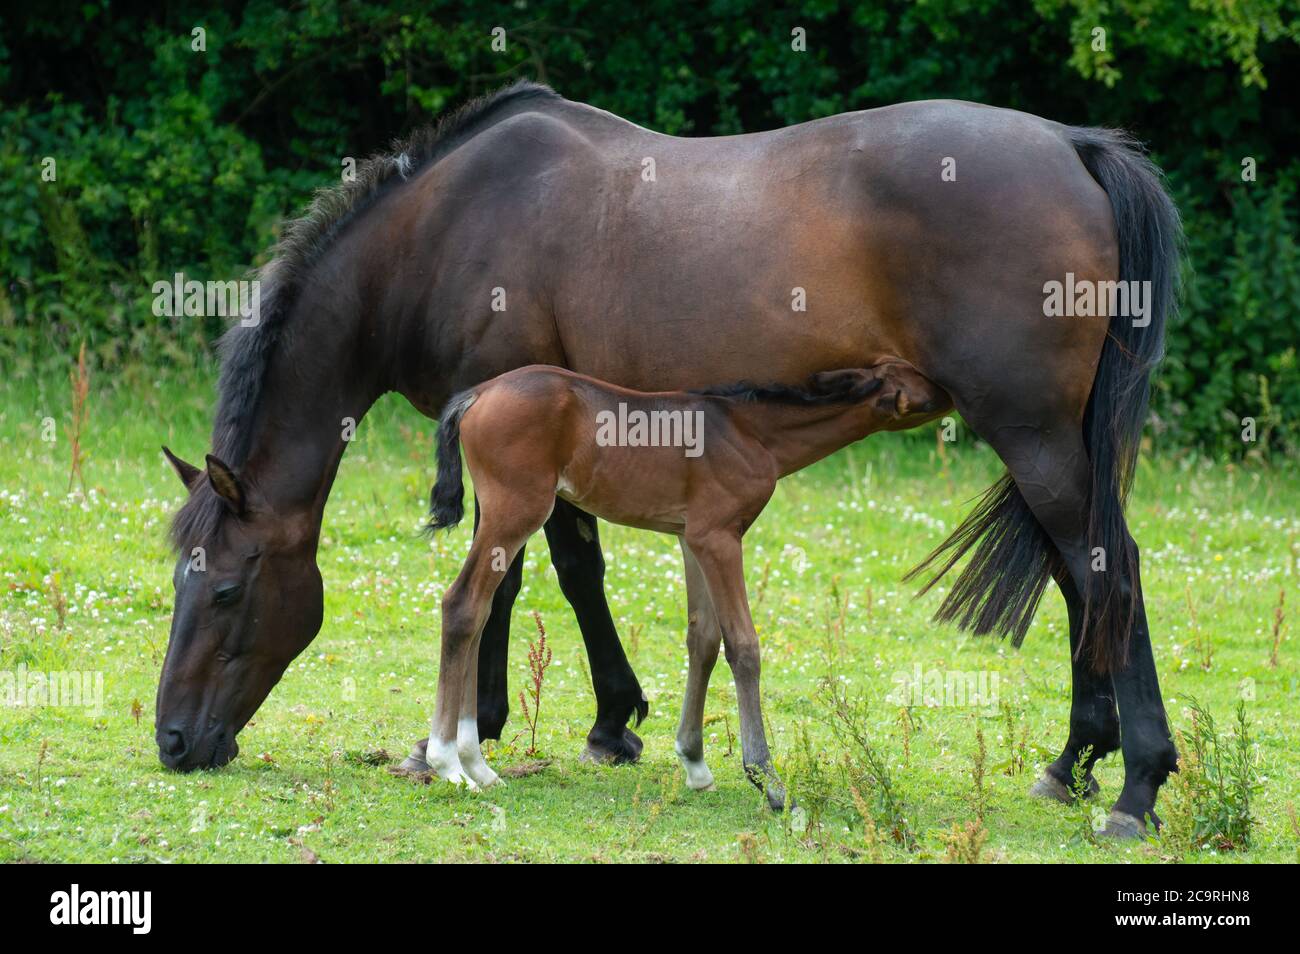 A two-week-old bay foal feeding from his mother, who is grazing, in a grass field. Stock Photo